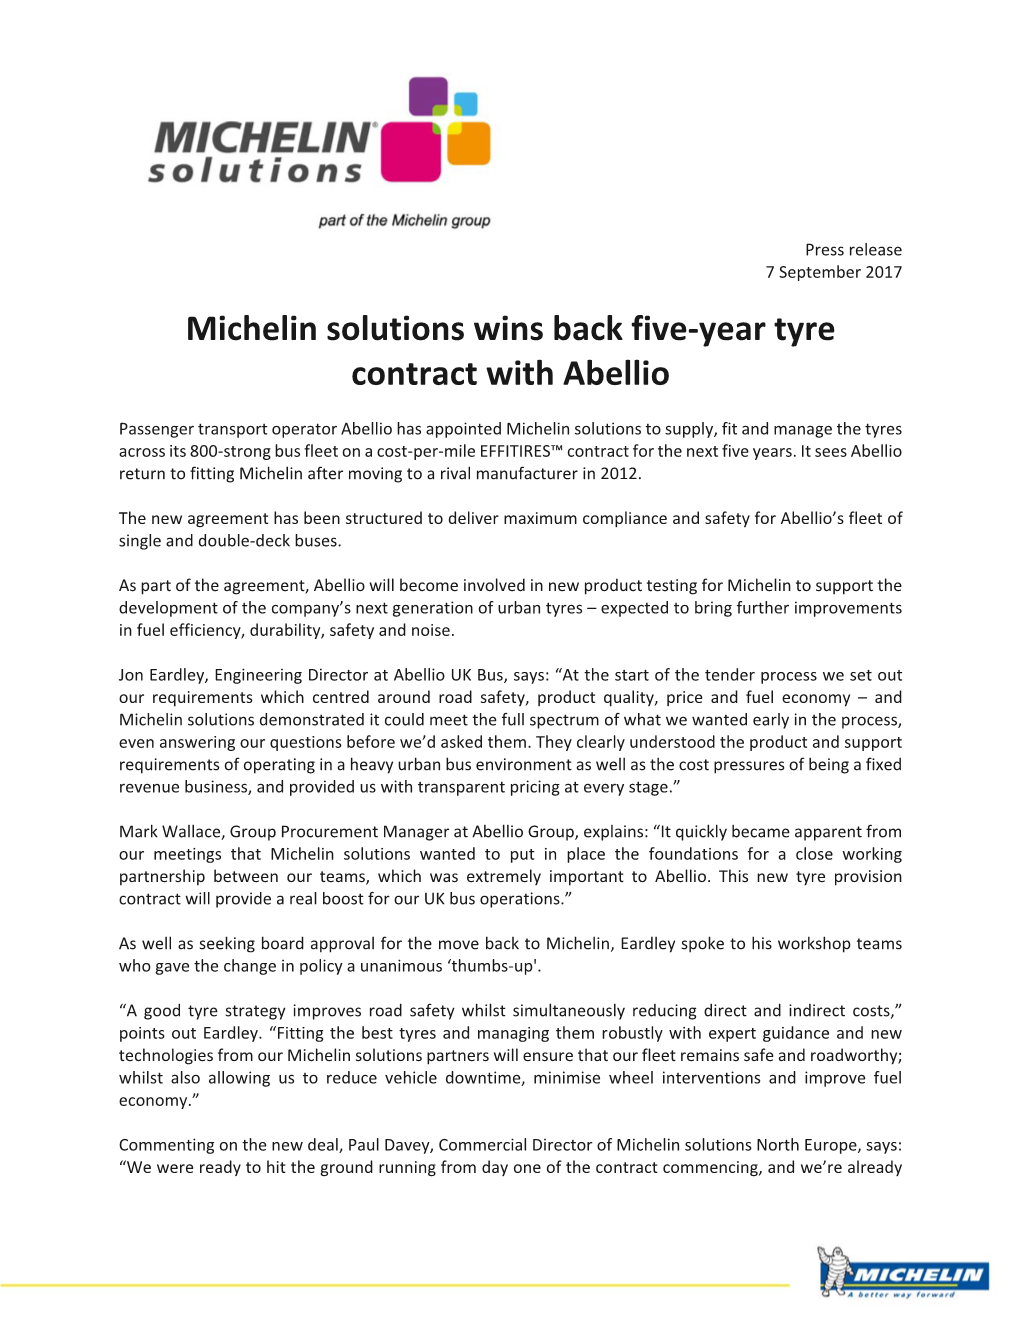 064 Michelin Solutions Wins Back Five-Year Tyre Contract with Abellio